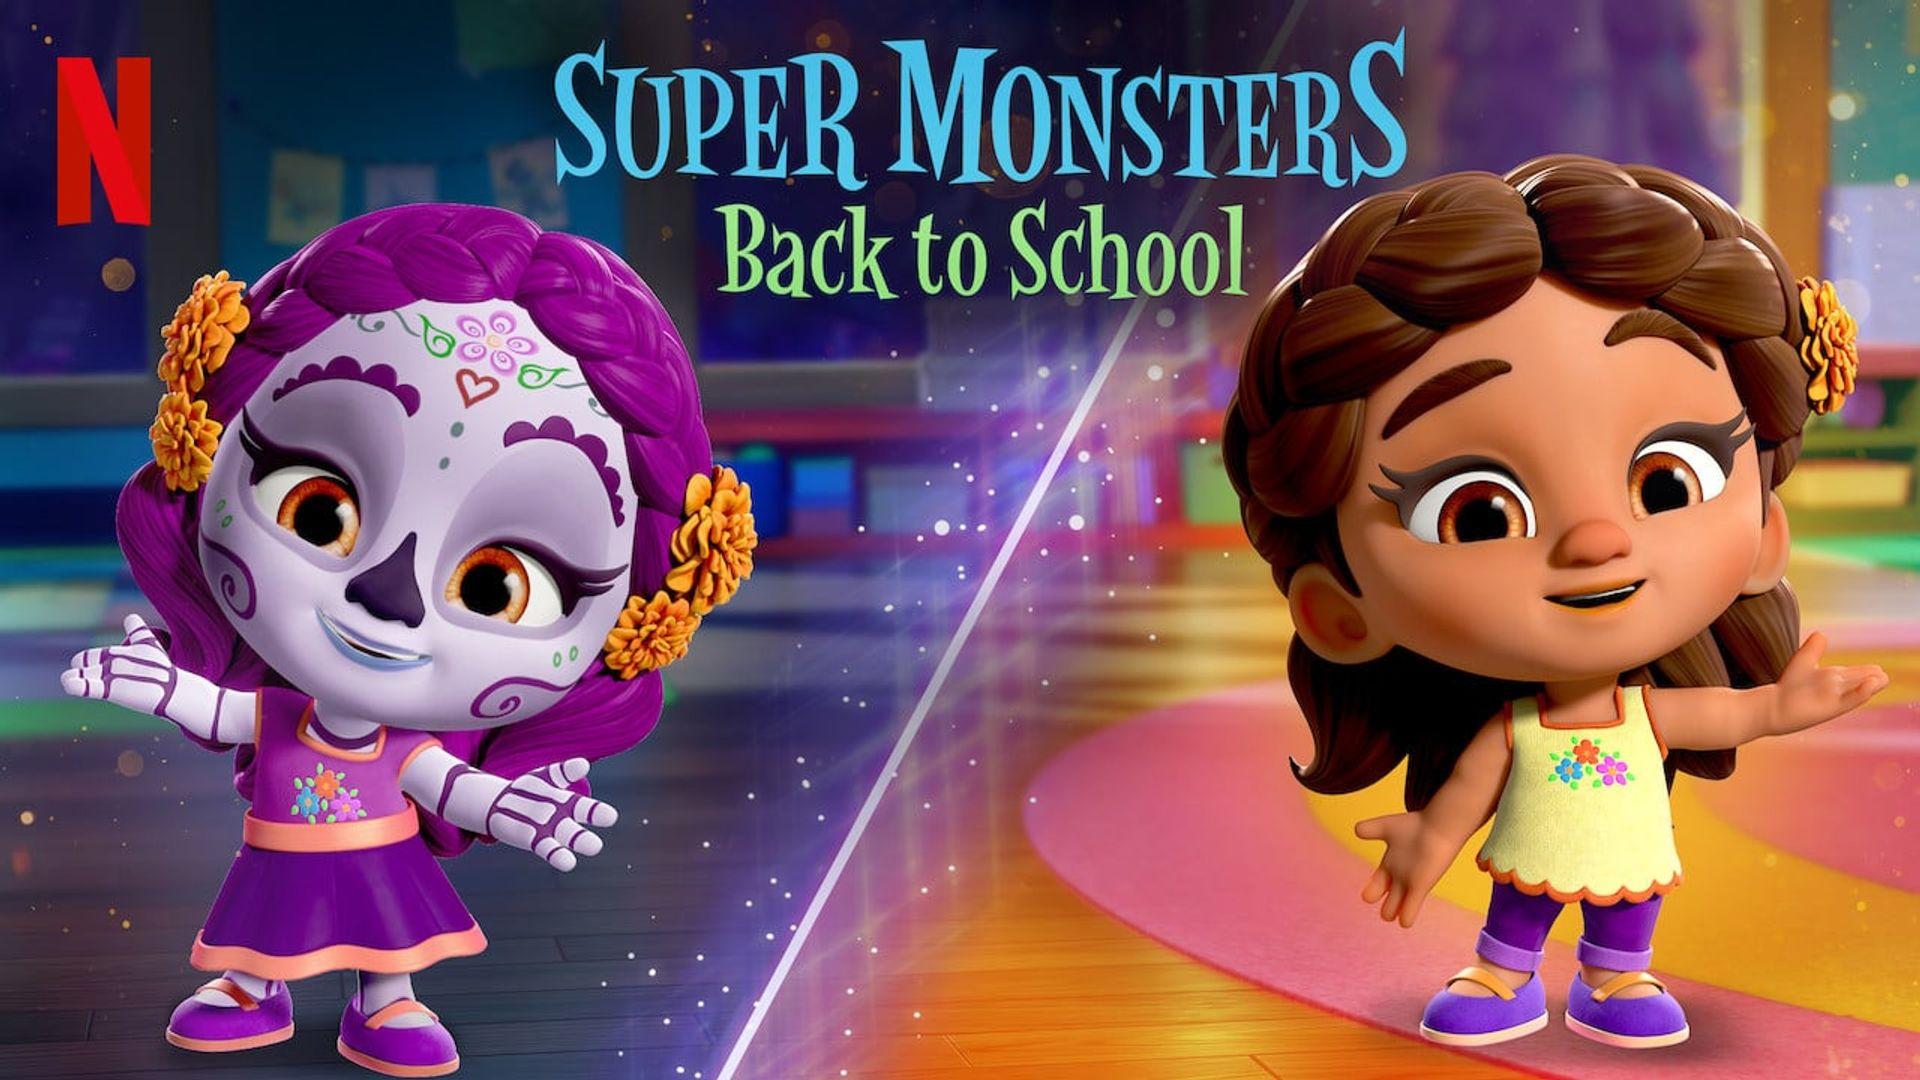 Super Monsters Back to School (2019) on Netflix or